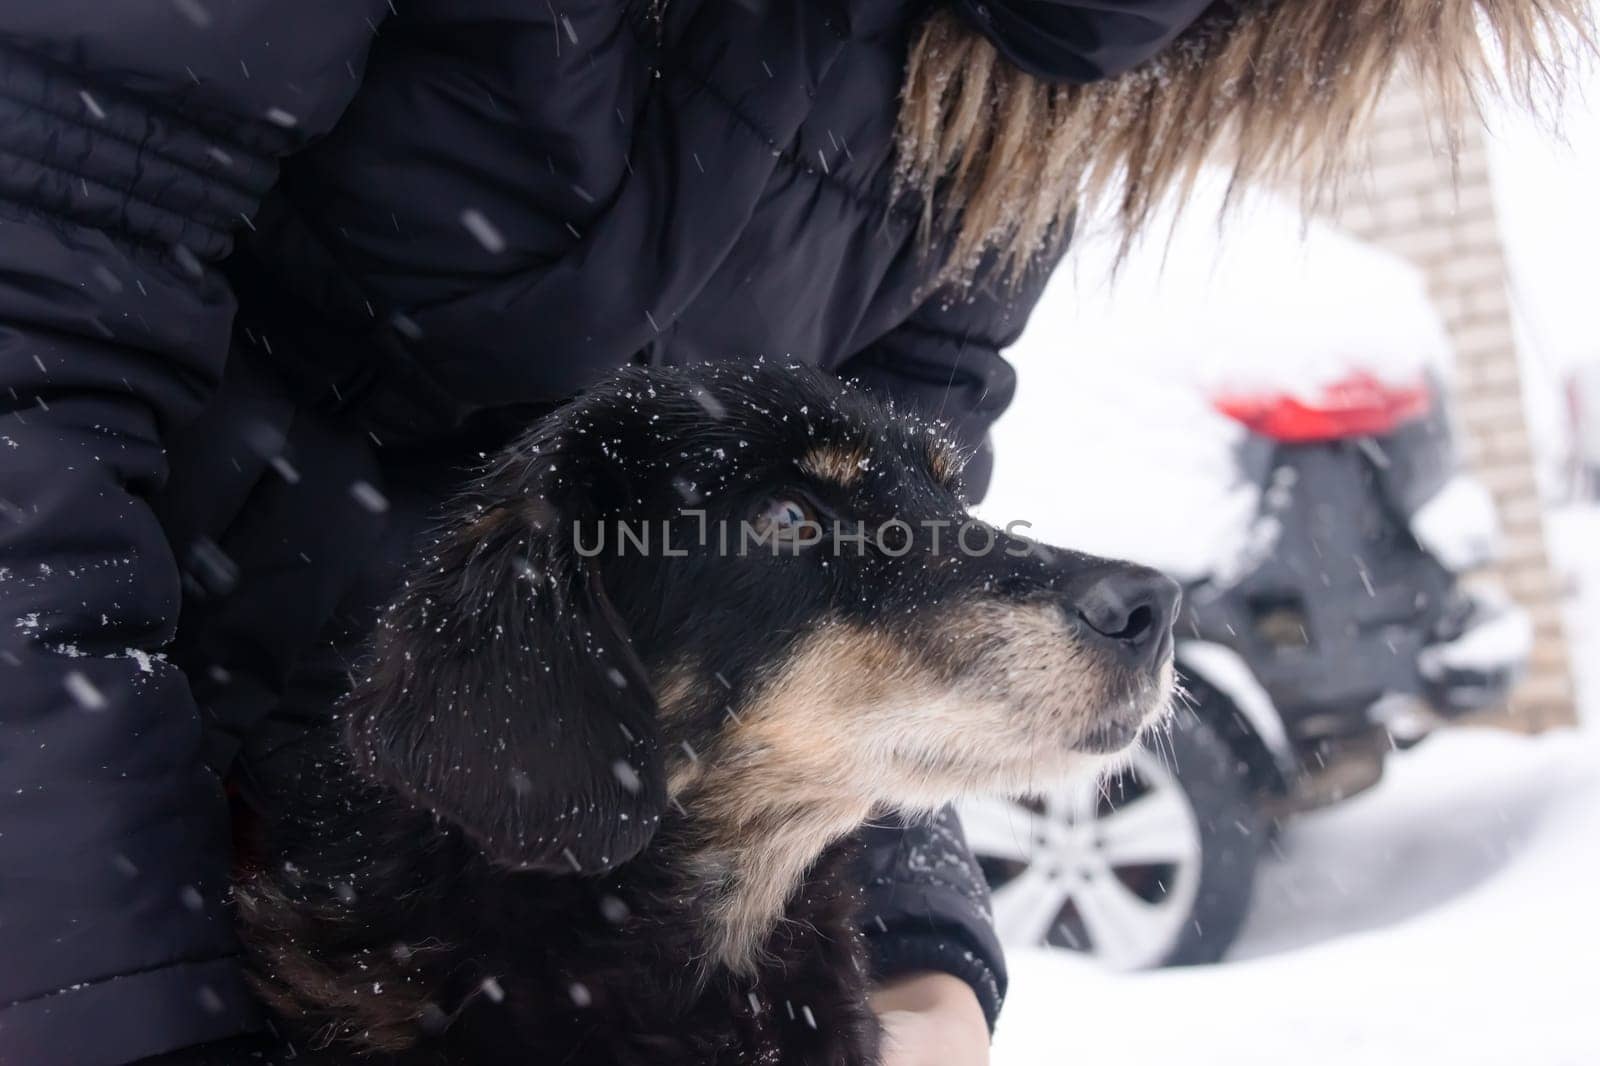 A man strokes a dog among the snow close up